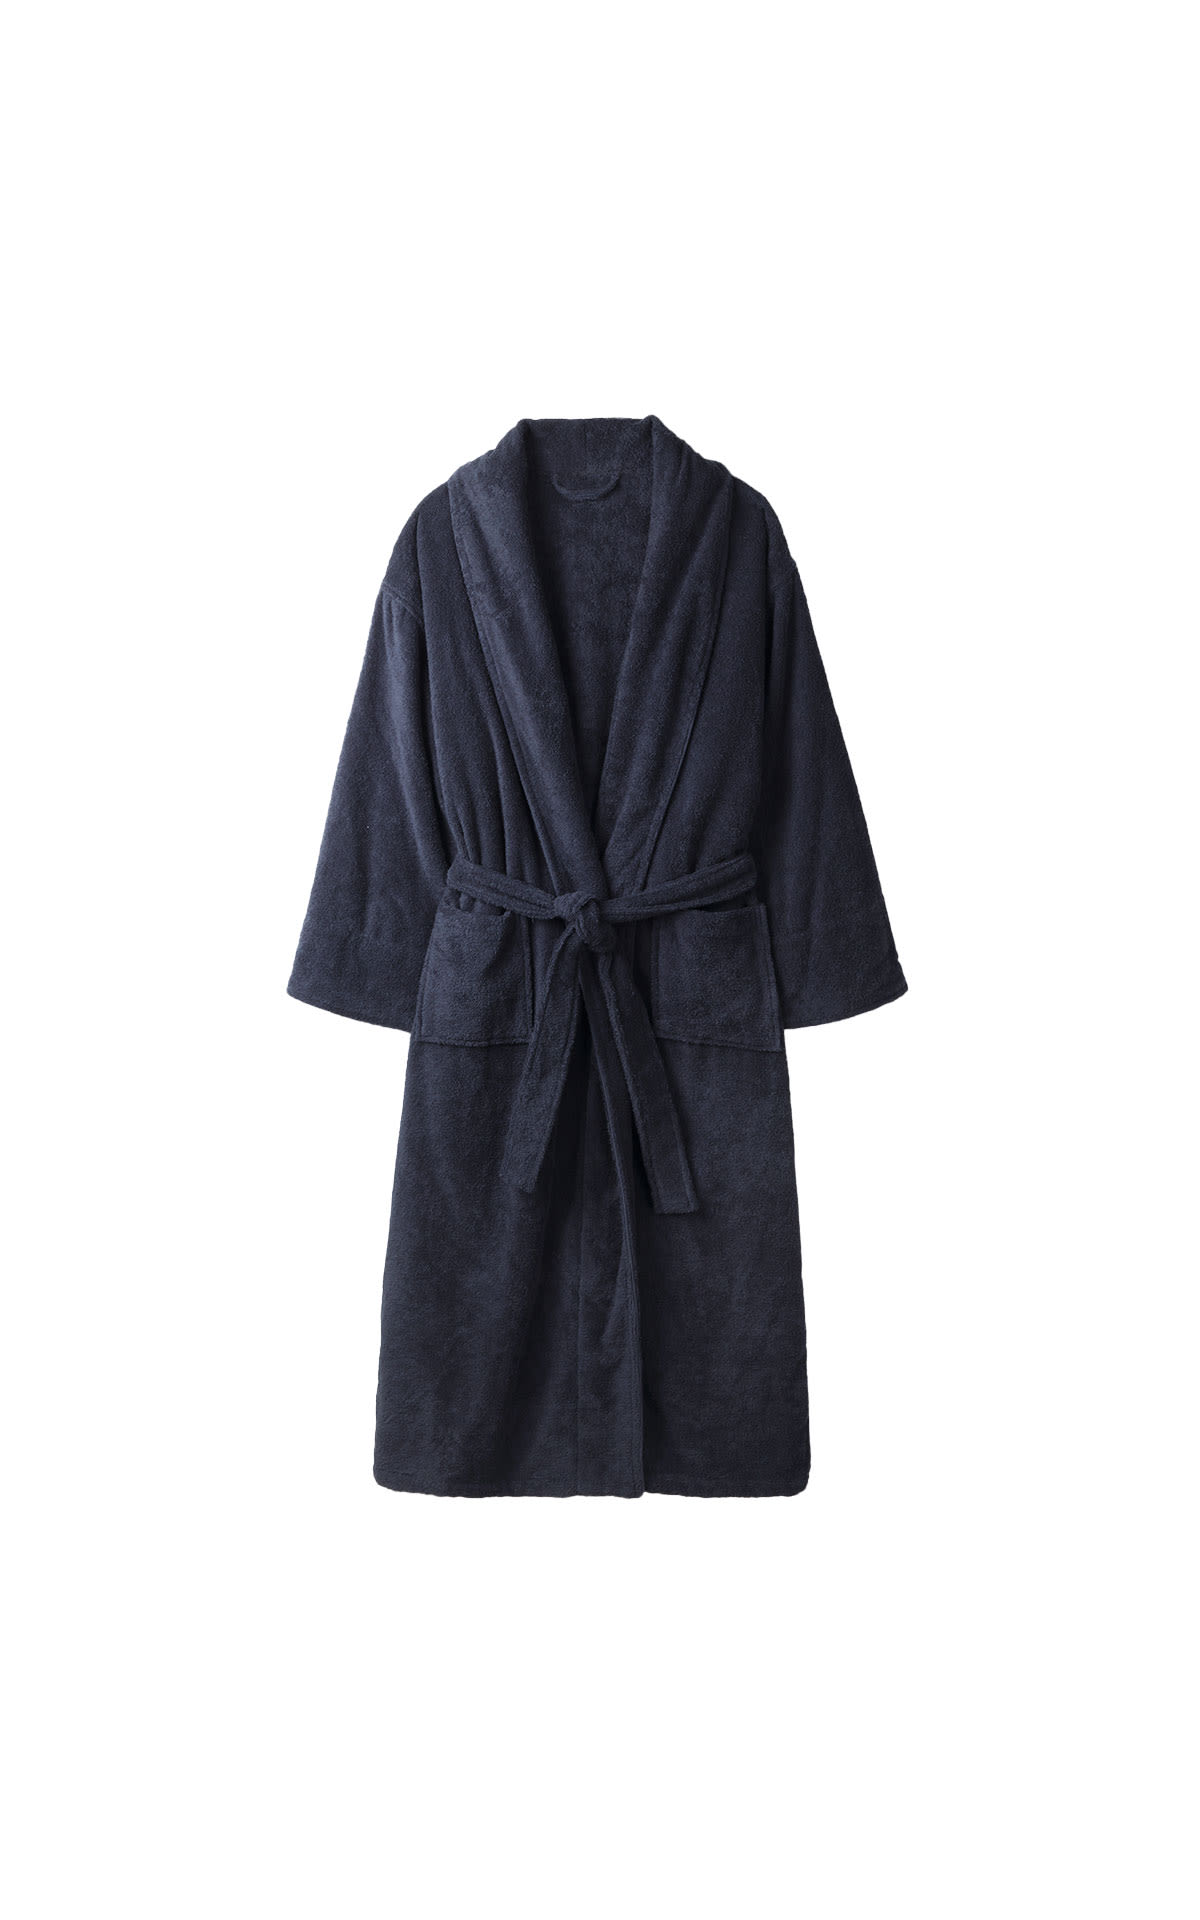 The White Company Essential cotton robe from Bicester Village